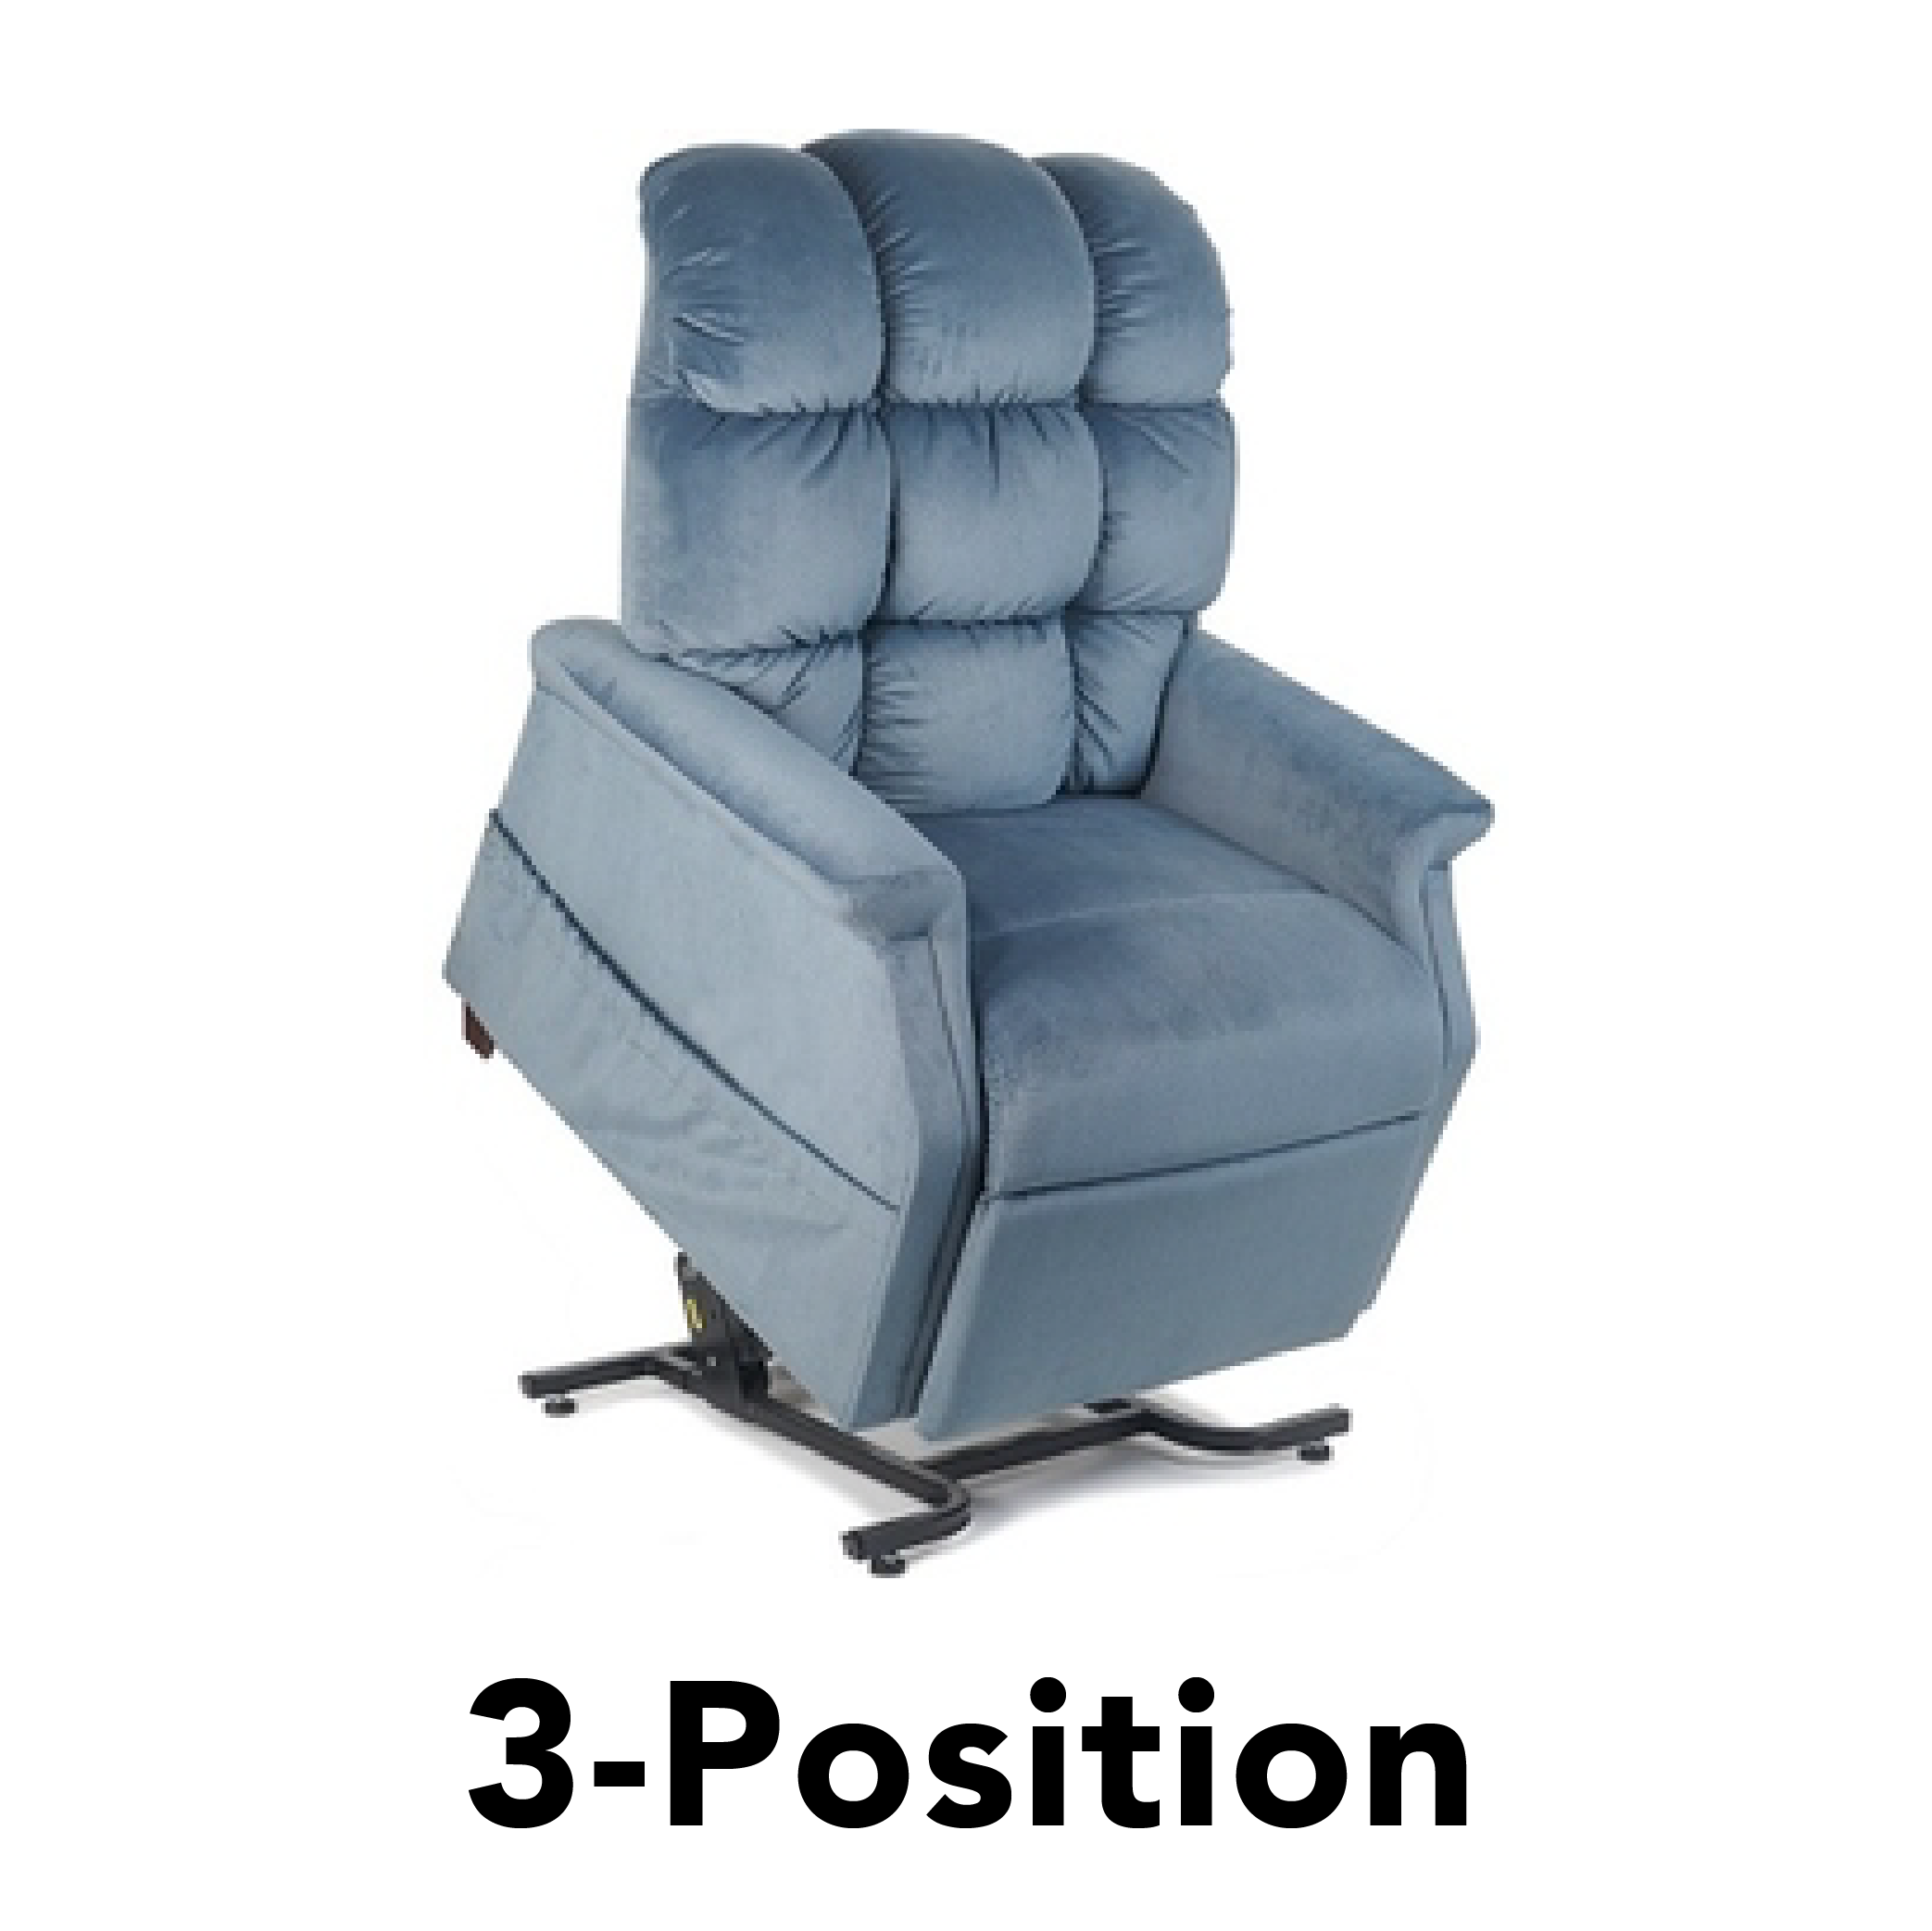 3 position lift chairs category